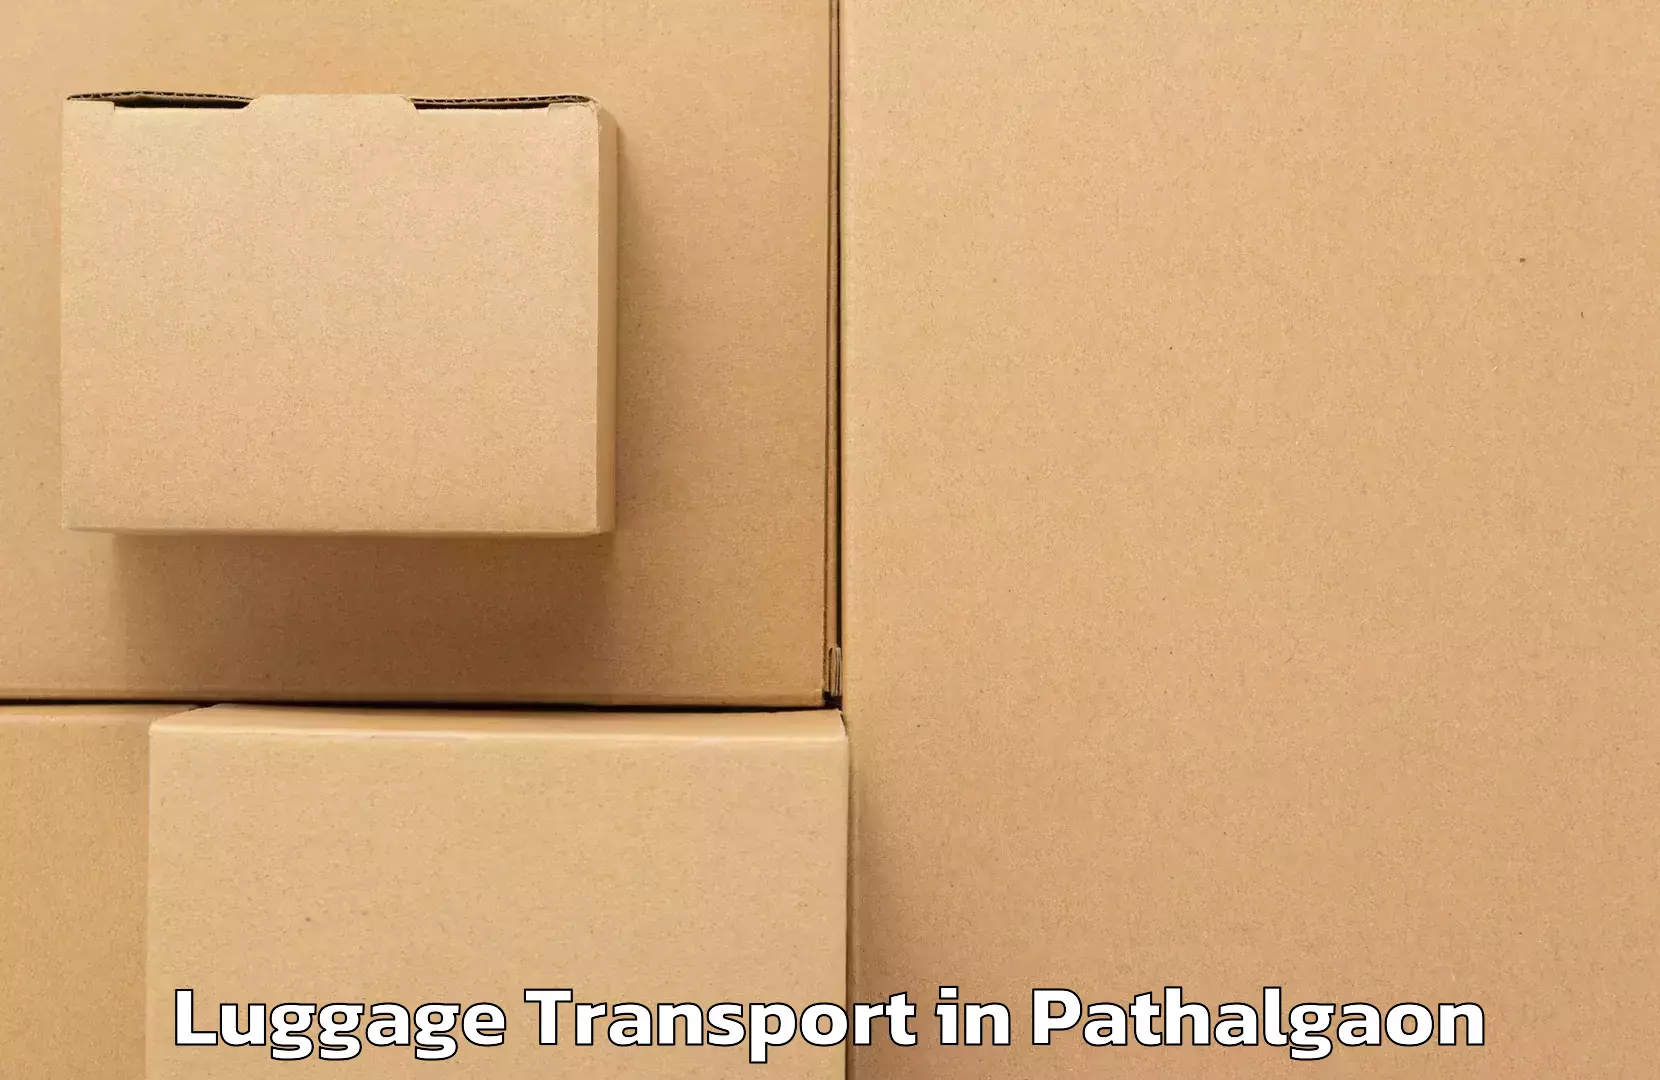 Hassle-free luggage shipping in Pathalgaon